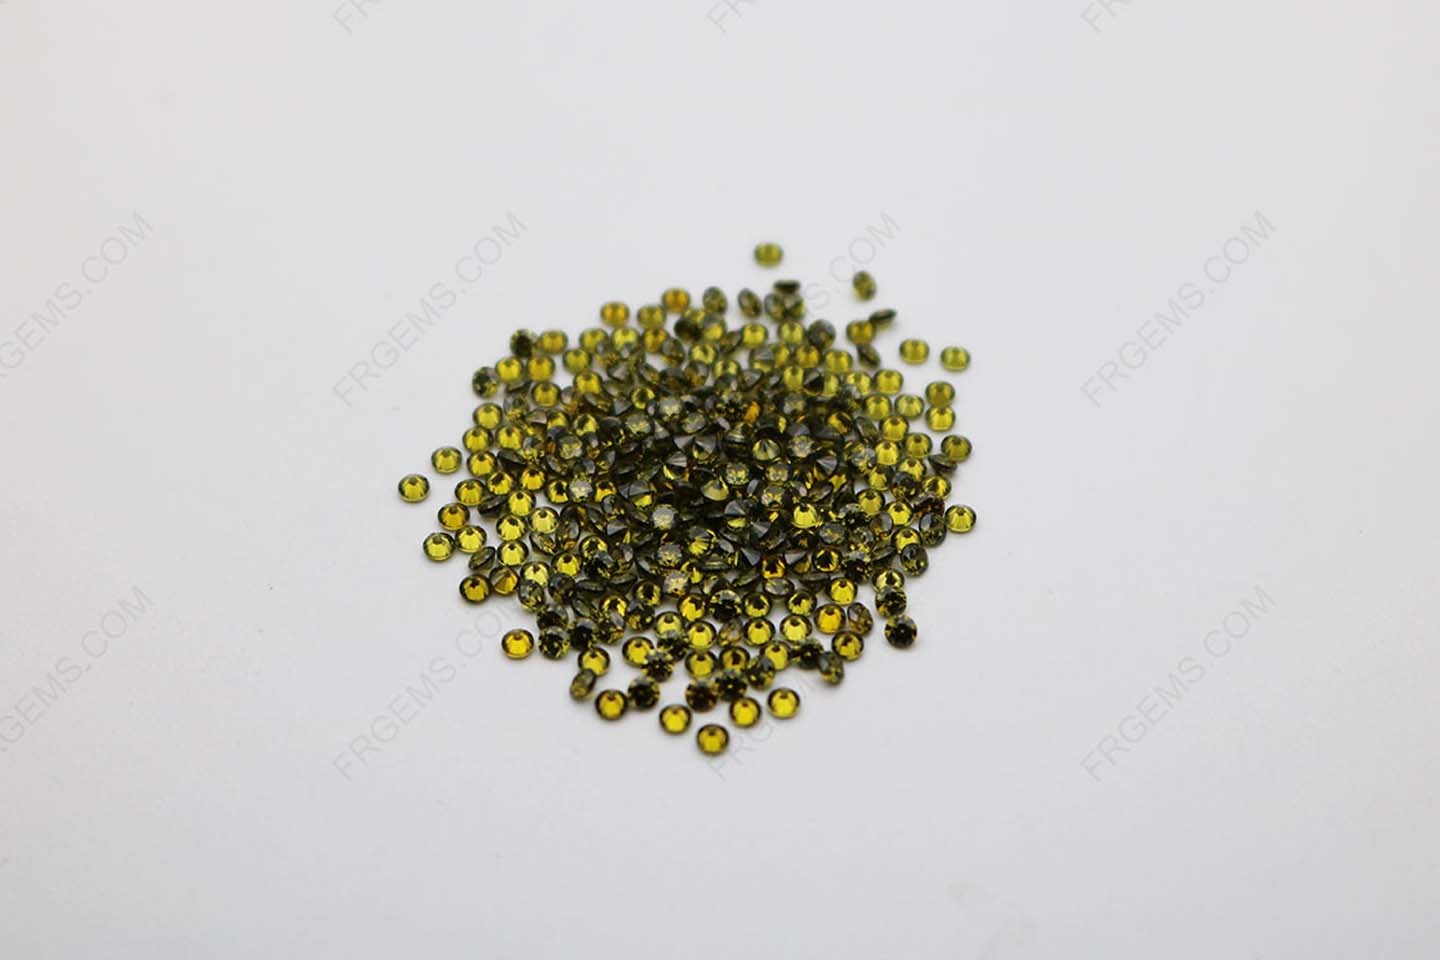 Cubic Zirconia Peridot Round Shape faceted diamond cut 2mm Melee stones CZ27 IMG_1016